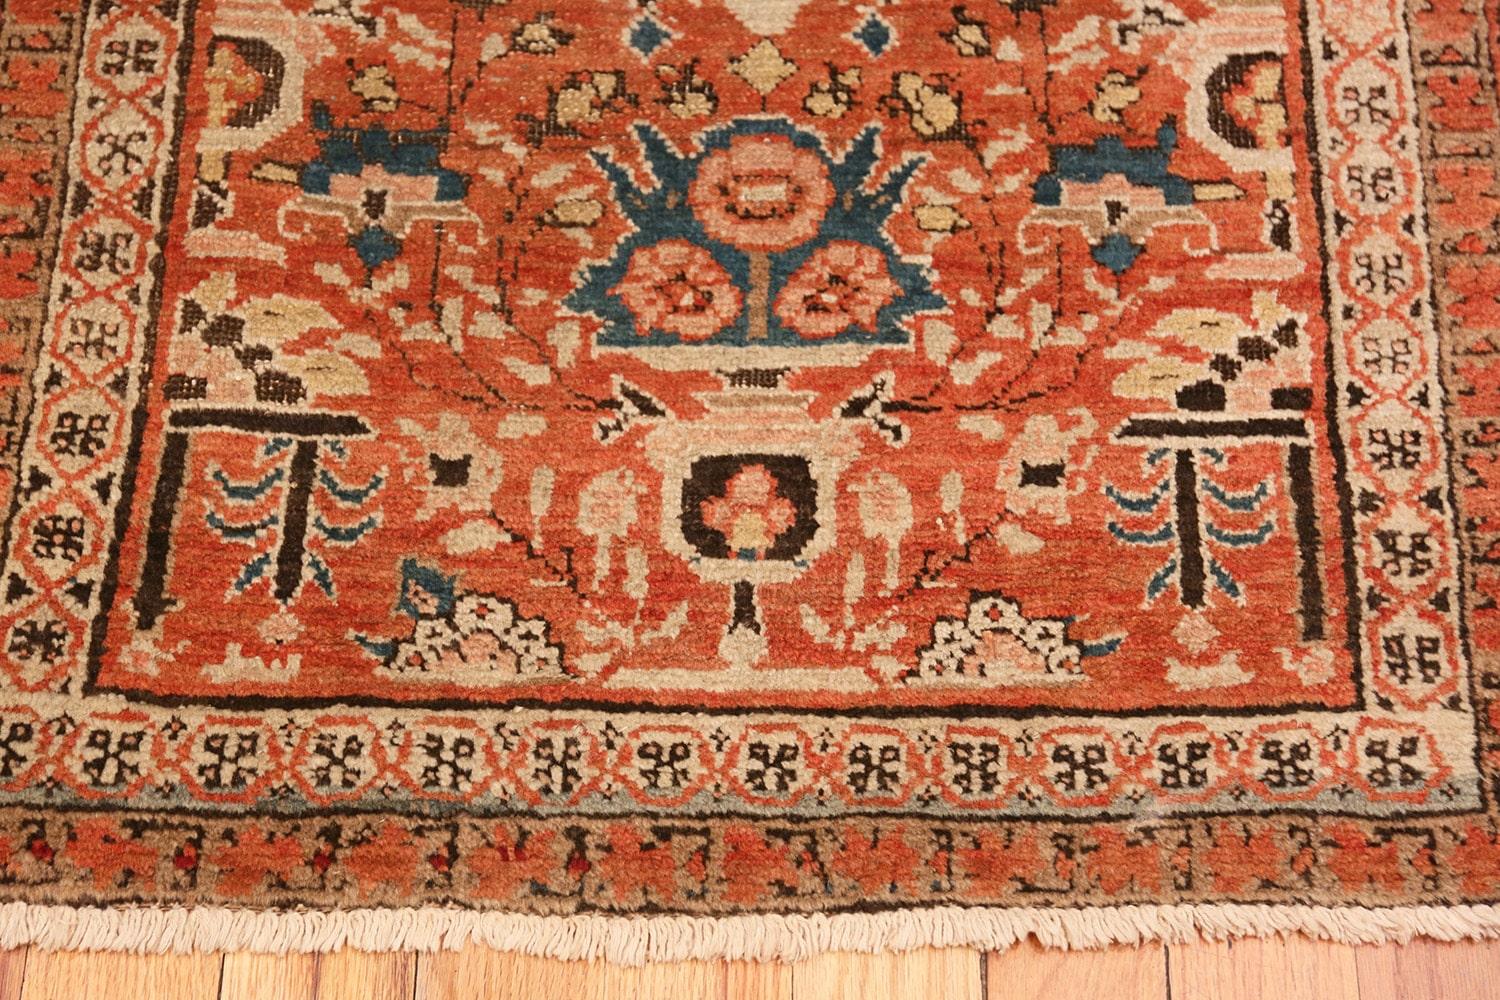 Antique Persian Bakshaish rug, country of origin: Persia, date circa turn of the 20th century. Size: 3 ft x 4 ft 4 in (0.91 m x 1.32 m). 

Here is a delightful antique rug. Perfectly aged, this antique Persian Bakshaish carpet showcases the free